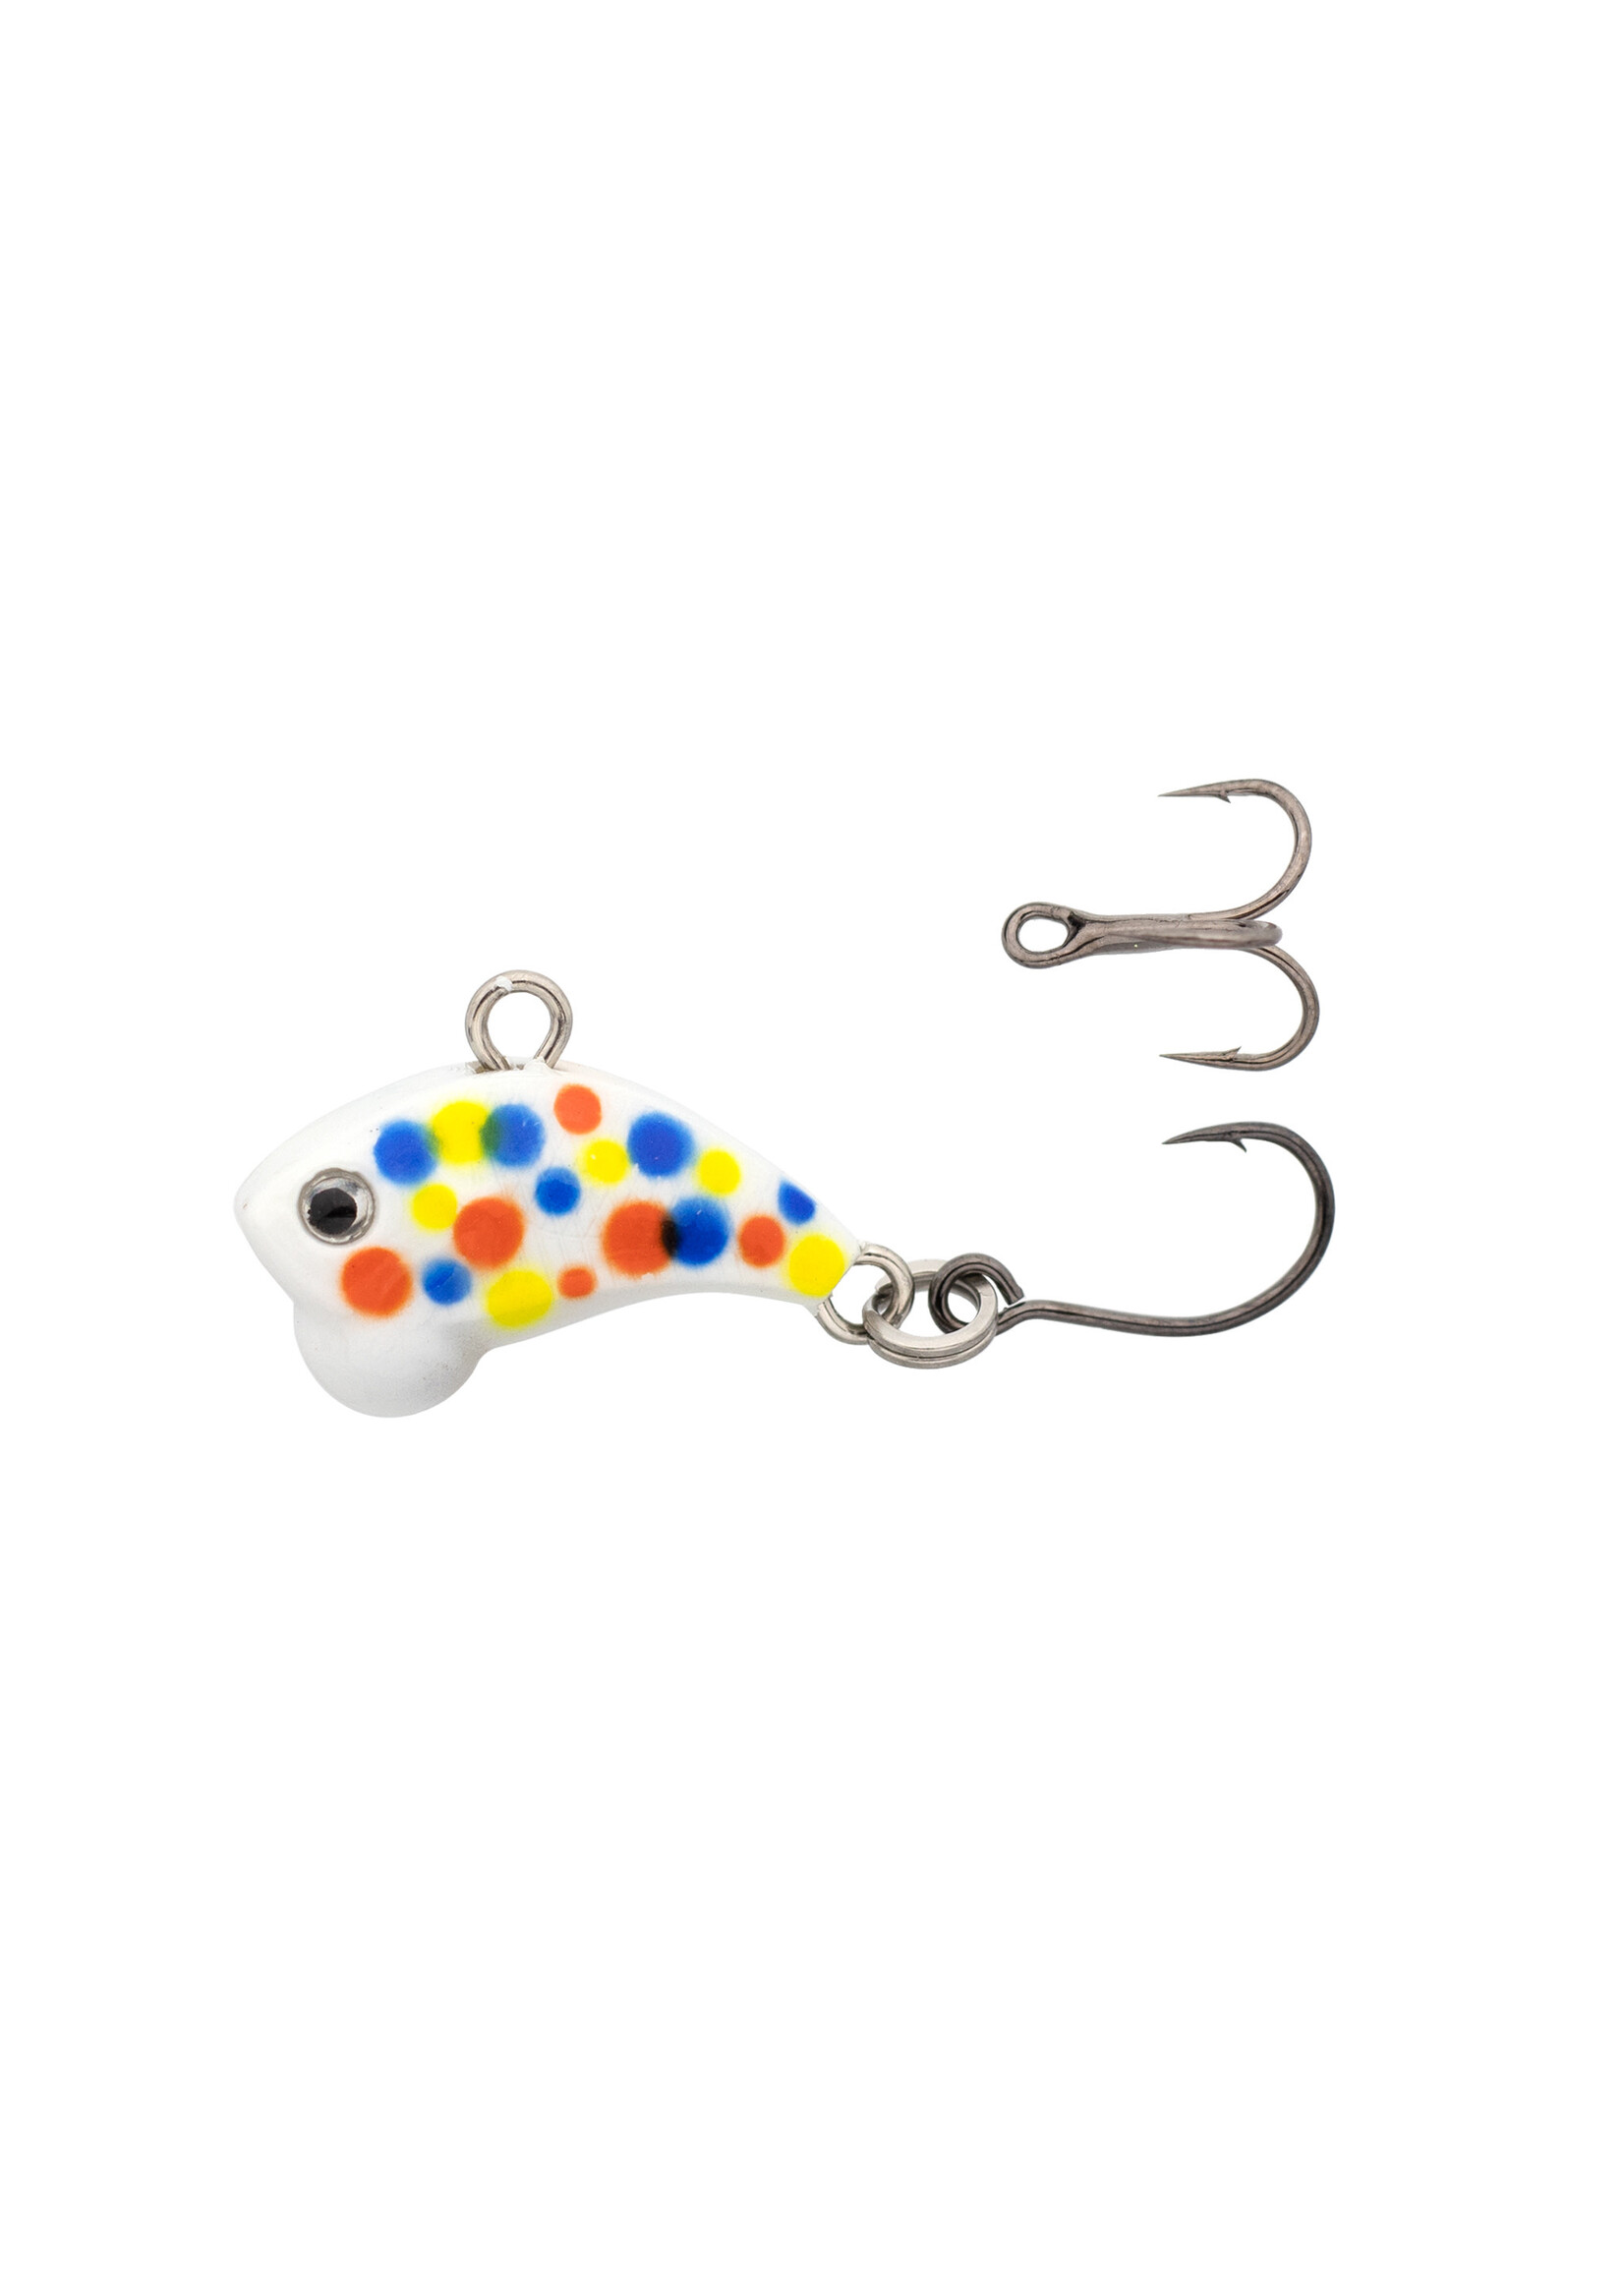  Z-Viber Micro - Ultra Light and Ice Fishing Lure